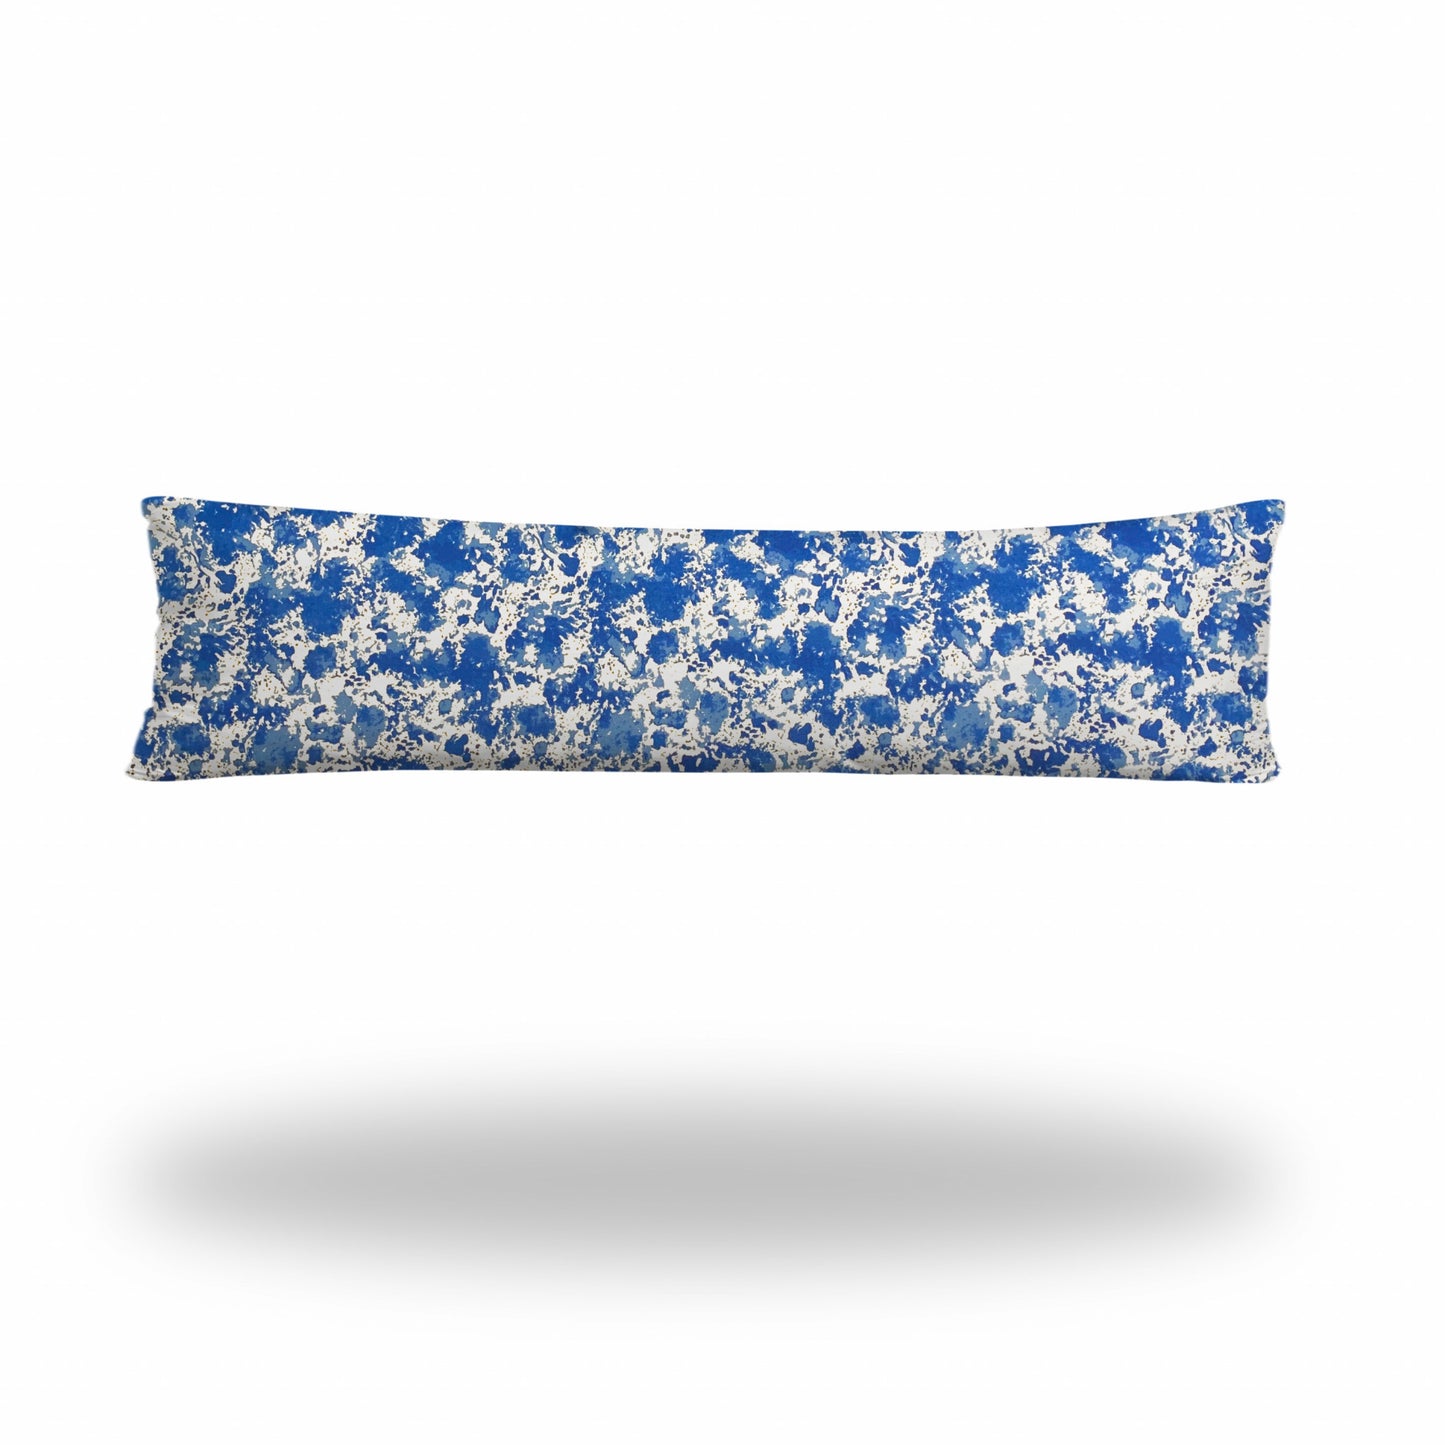 12" X 48" Blue And White Zippered Coastal Lumbar Indoor Outdoor Pillow Cover